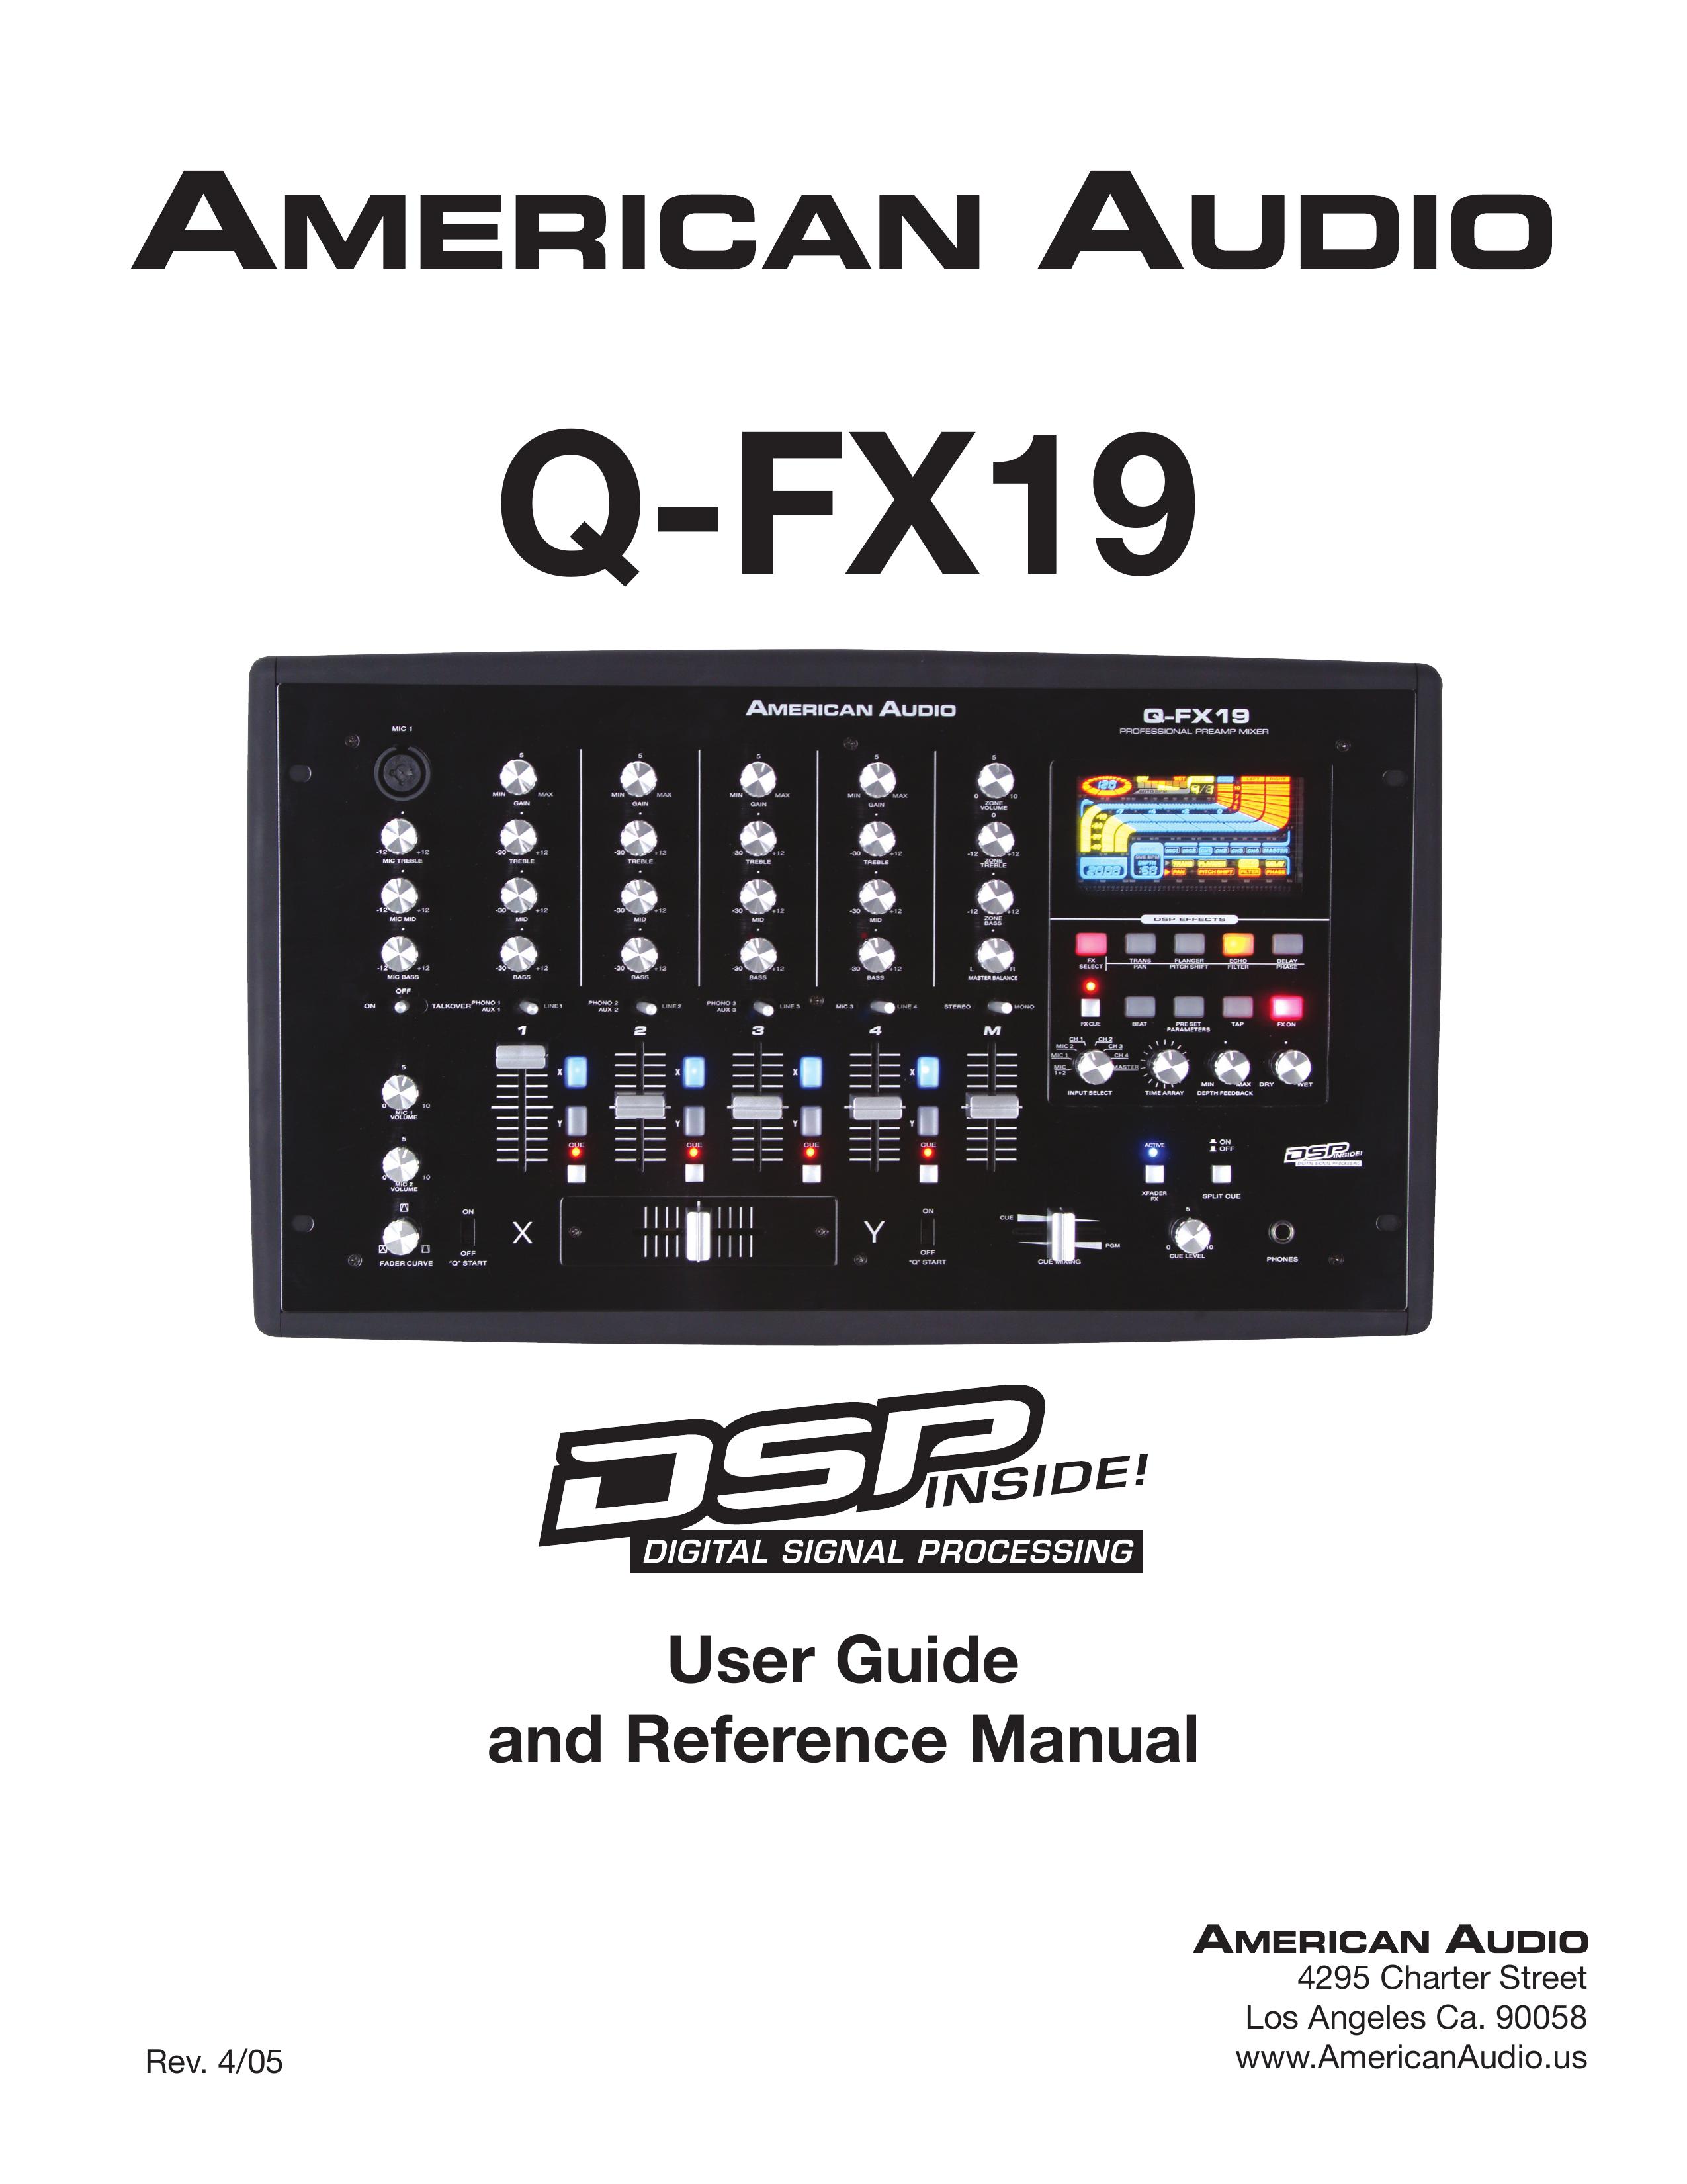 American Audio Q-FX19 Musical Instrument User Manual (Page 1)